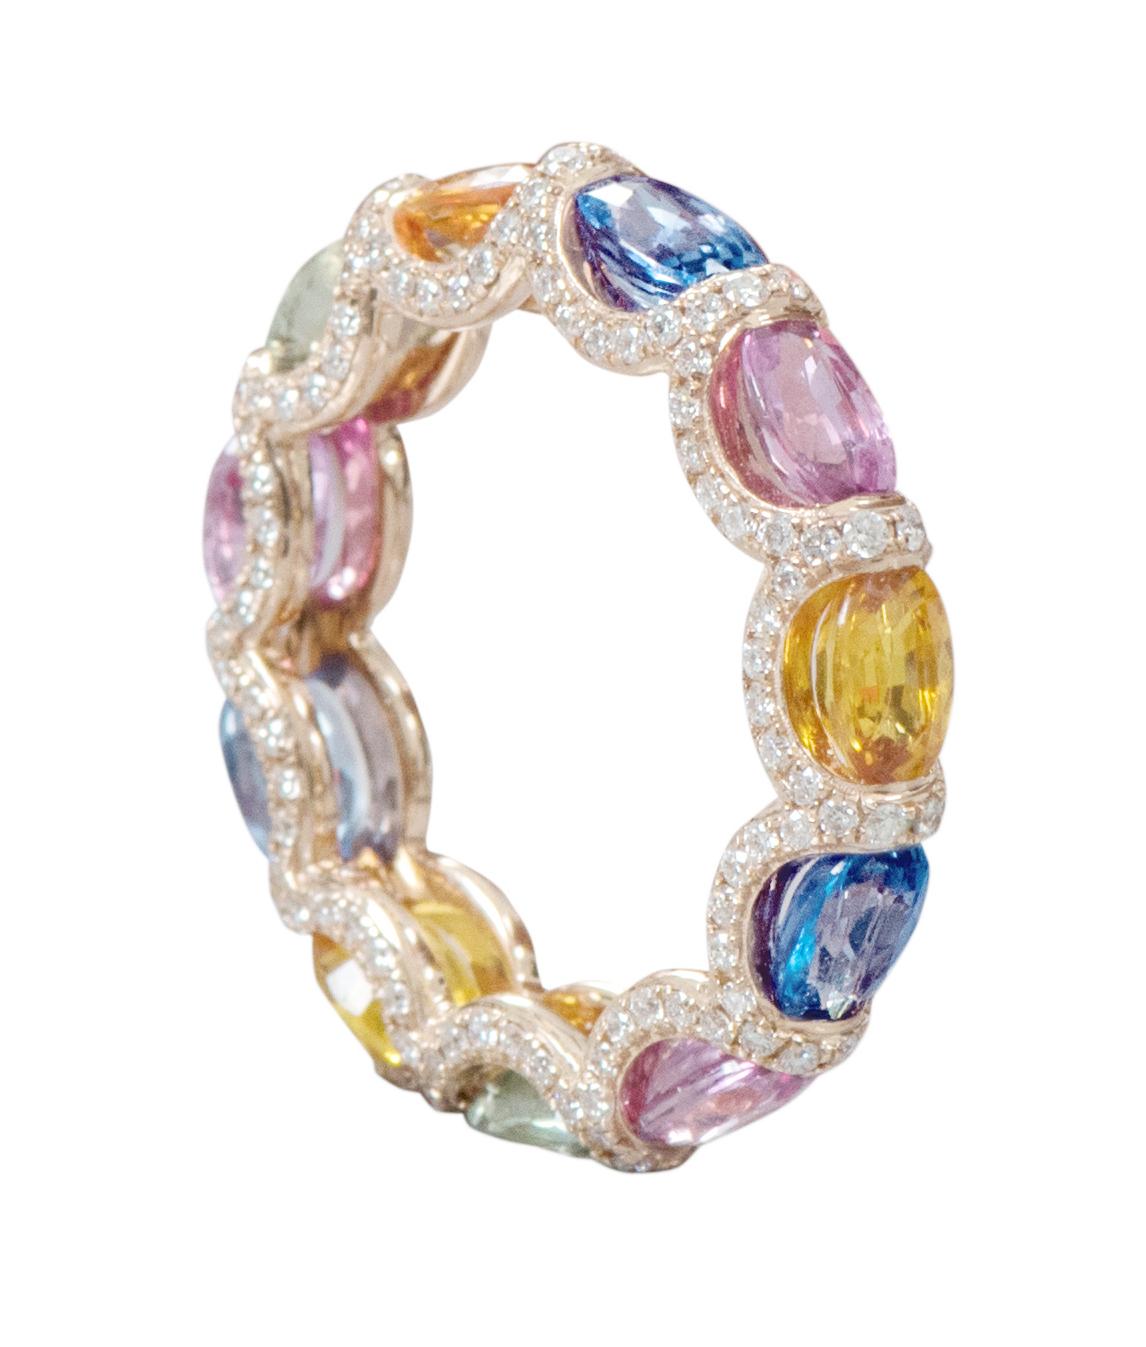 18 Karat Rose Gold 7.61 Carat Multi-Sapphire and Diamond Eternity Band Ring

This impeccable rainbow multi-sapphire and diamond band is incredible. The solitaire horizontally placed oval shape multi-sapphires are brilliantly enclosed in between pave